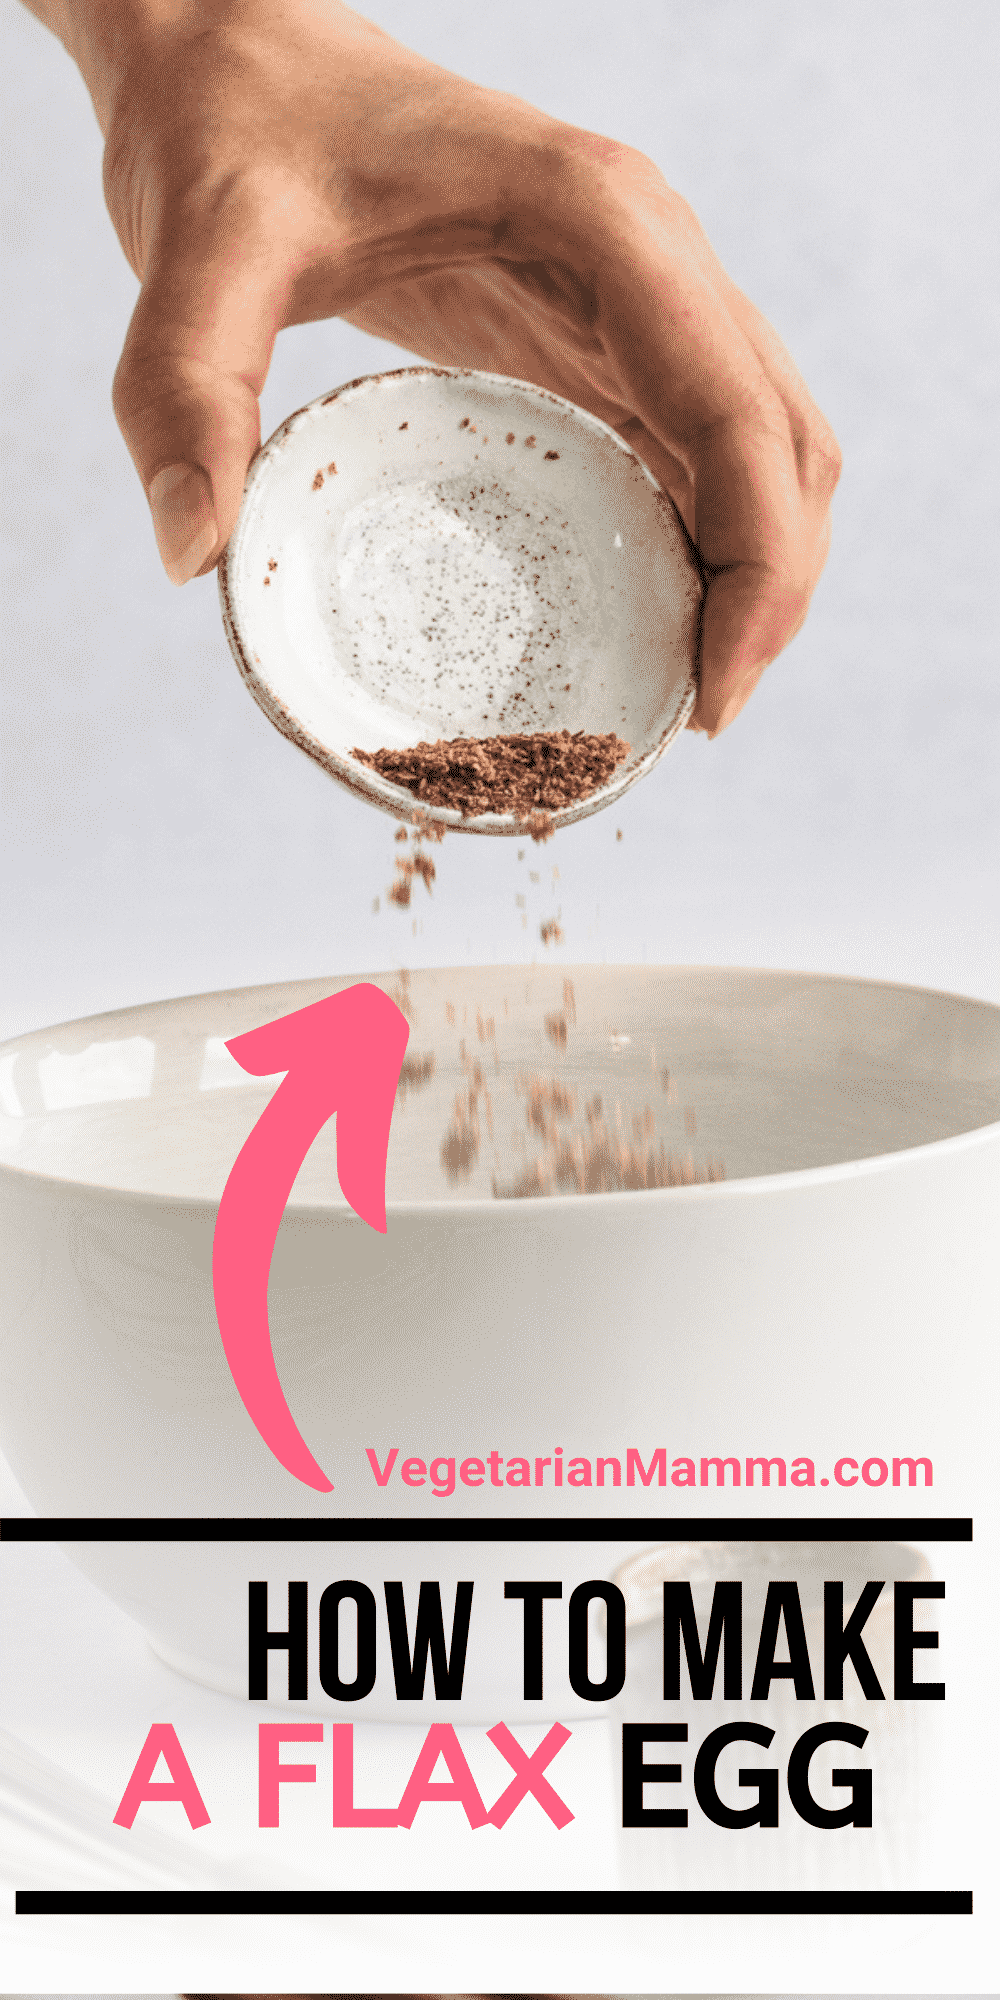 Learn how to make a flax egg for all your vegan baking! It only takes 2 simple ingredients to make the best vegan egg substitute. #veganegg #veganbaking